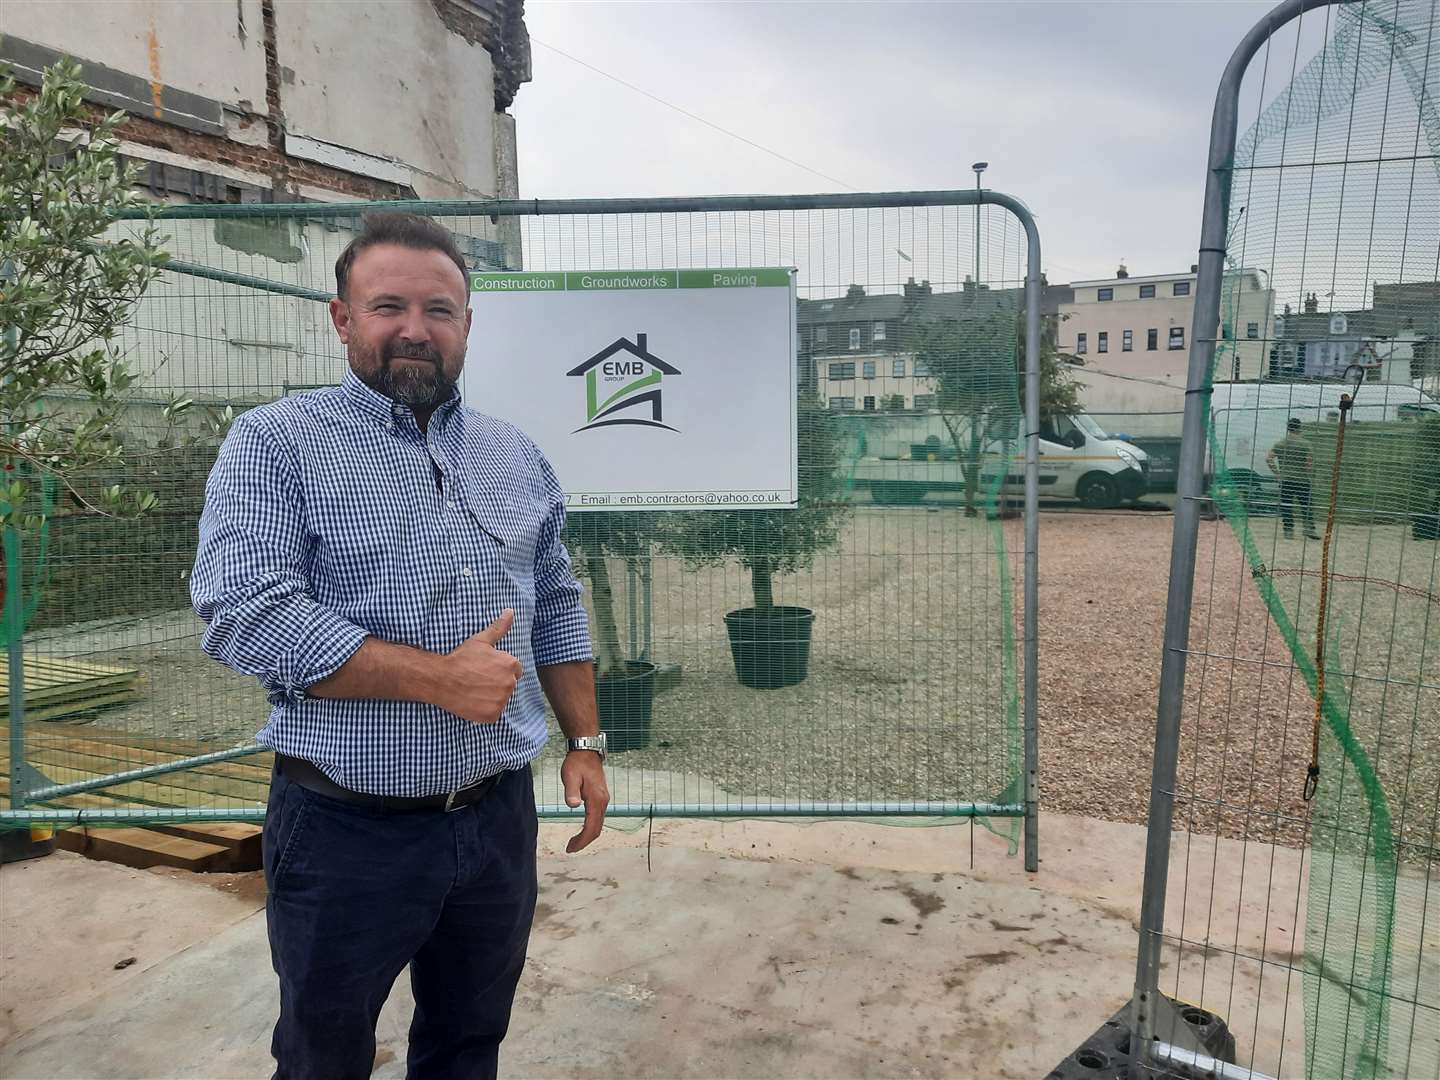 A La Turka owner Mehmet Dari will use the plot as an outdoor seating area for his restaurant until he receives the go-ahead for the ambitious project